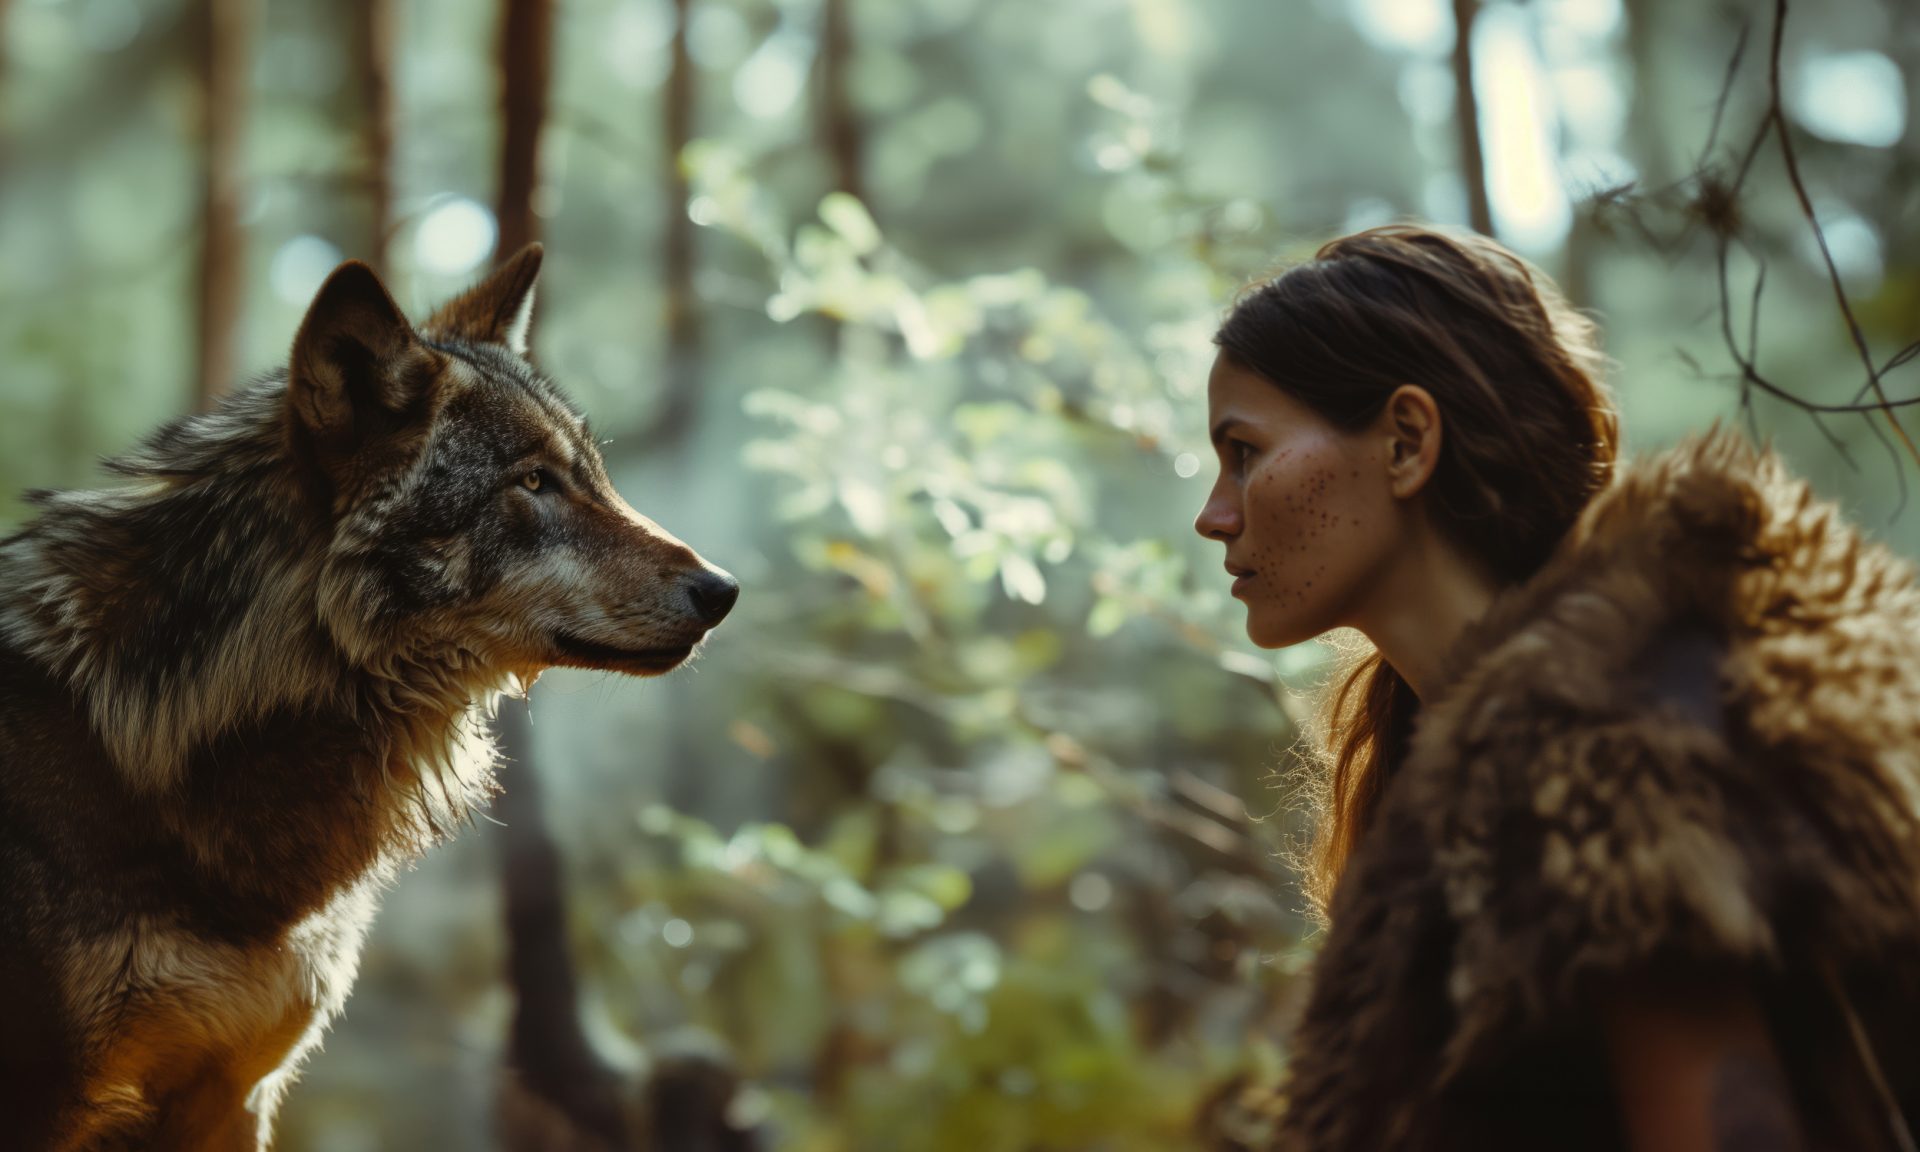 A wolf and a woman look at each other from a close distance in the forest. Calm atmosphere. The image was produced with artificial intelligence.